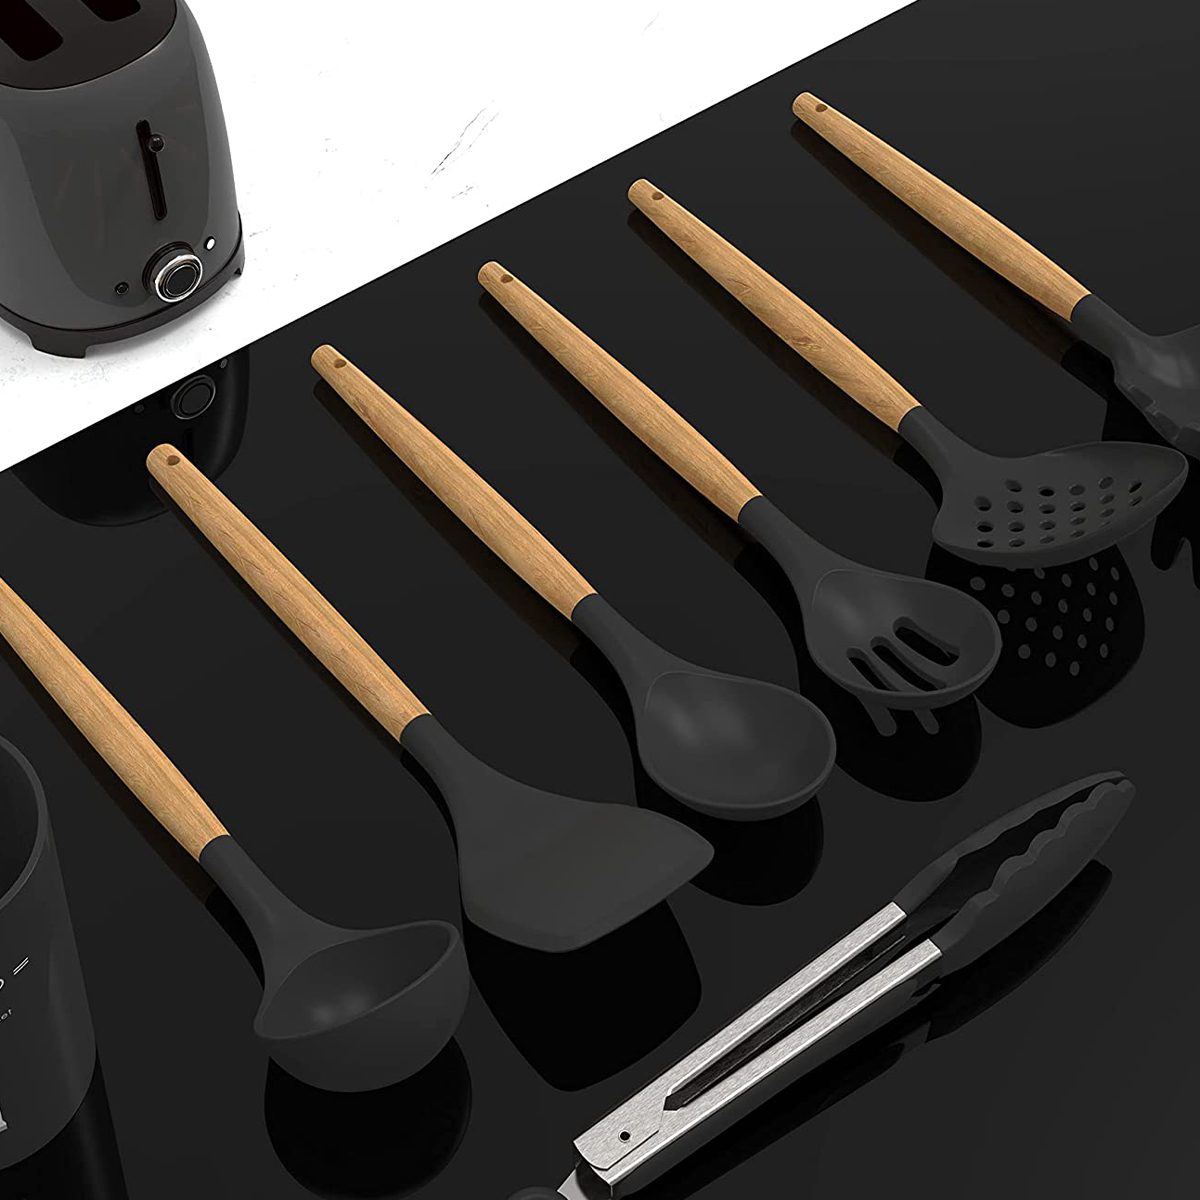 Which Utensils Should You Use with Nonstick Cookware? – American